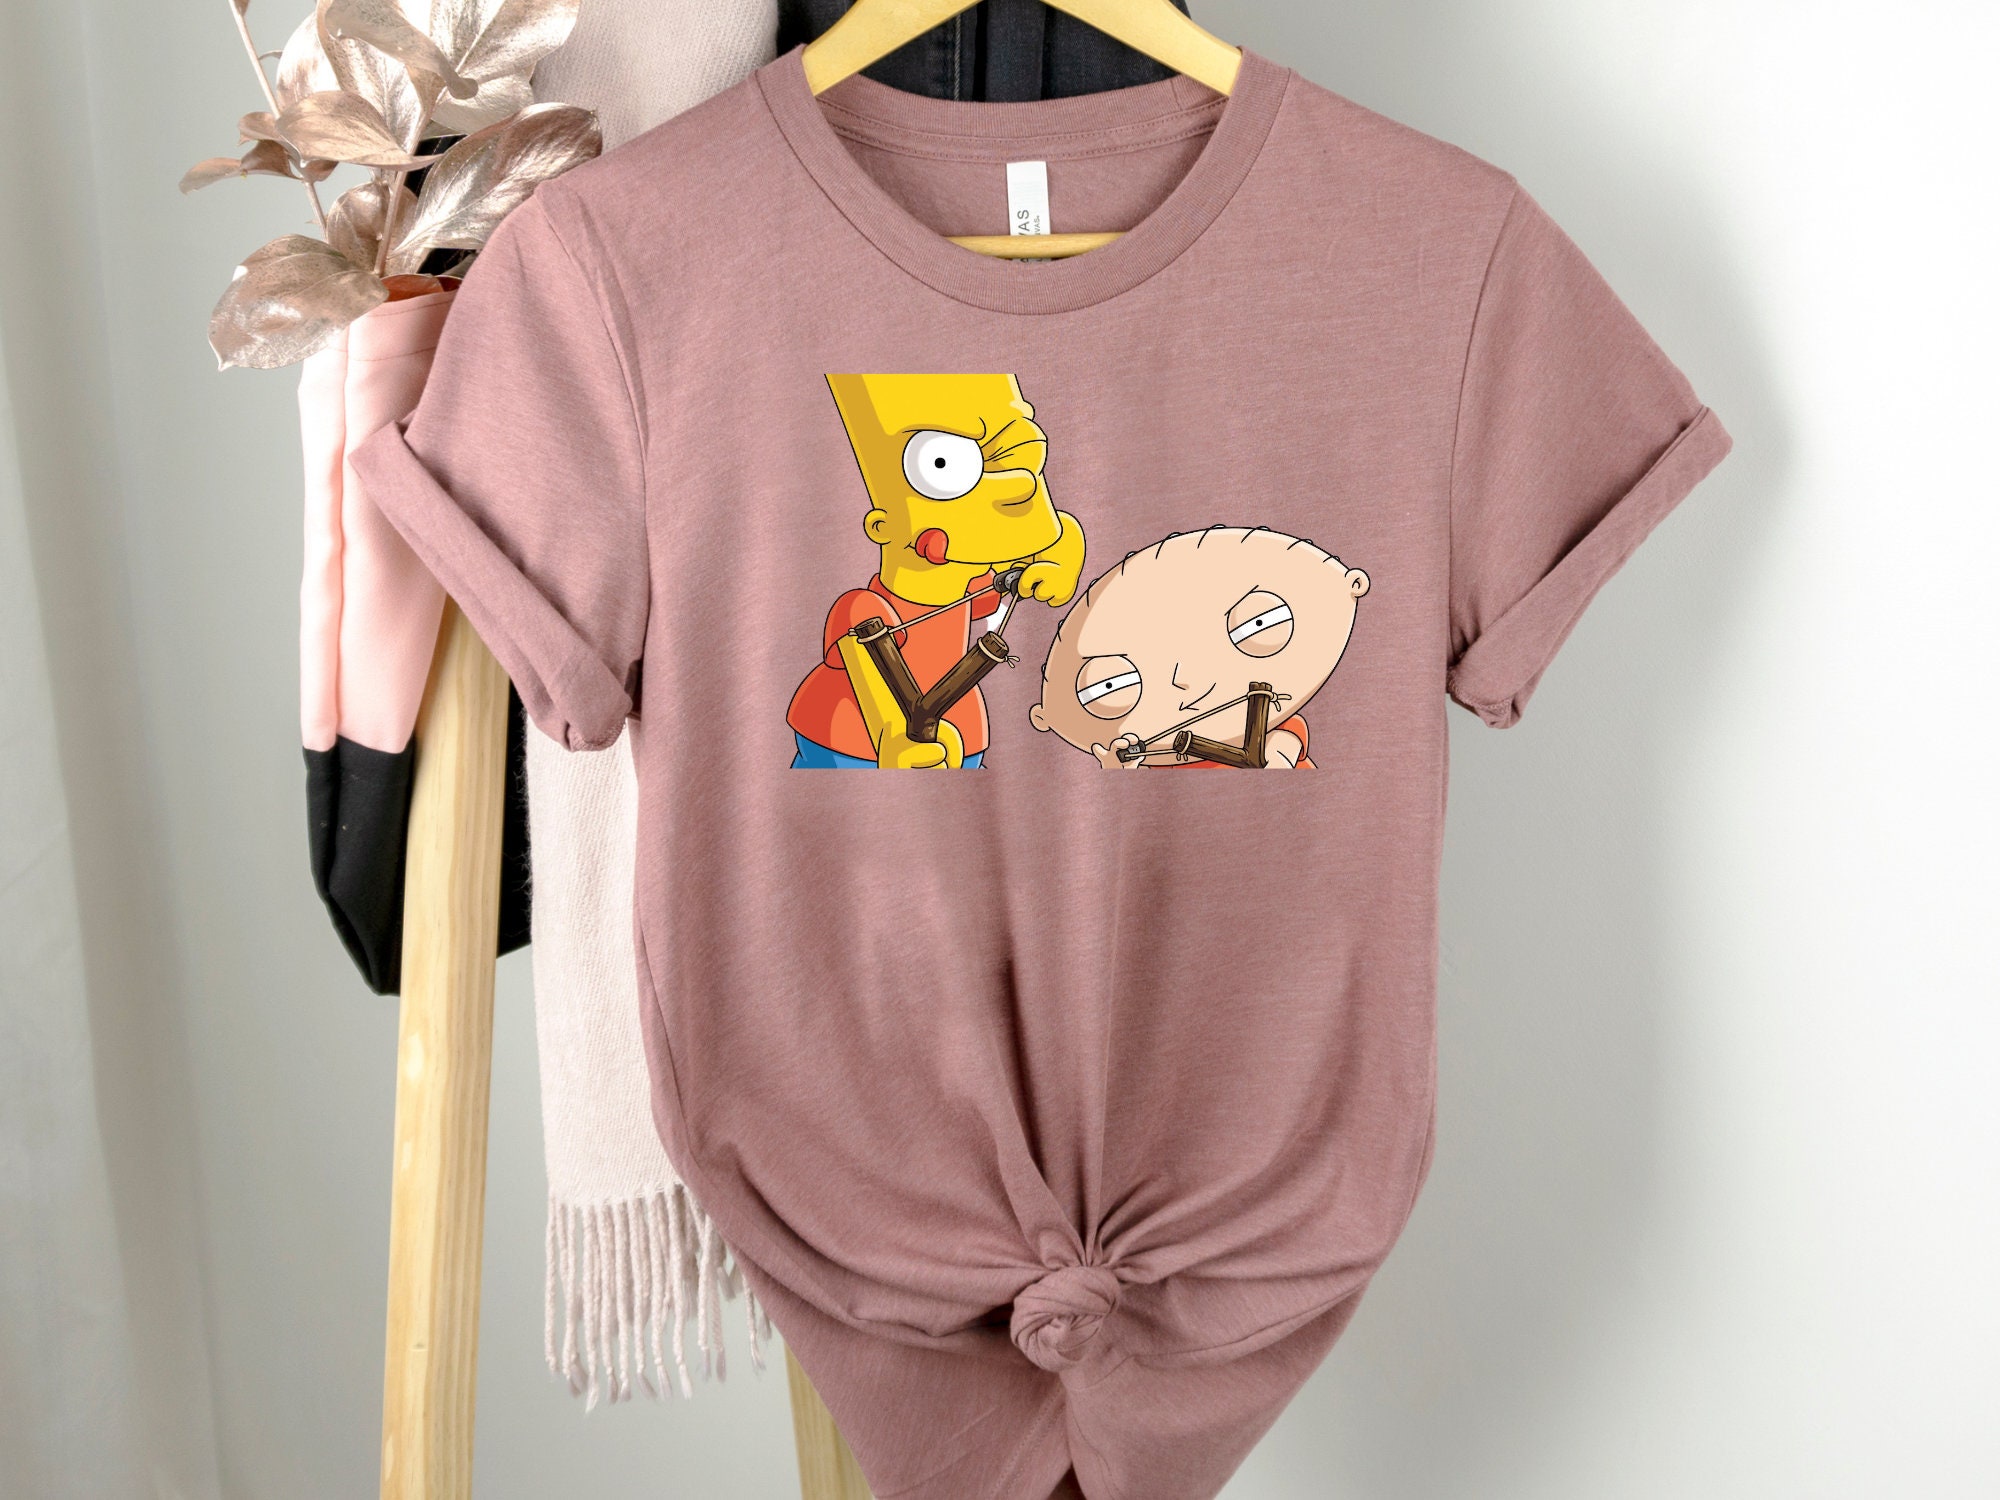 Discover T-shirt, The Simpsons Shortsleeve Summer Shirt, Funny Summer Gift T-shirt, Gift for Birthday, Gift for Kids, Toddler and Youth Shirt, Family